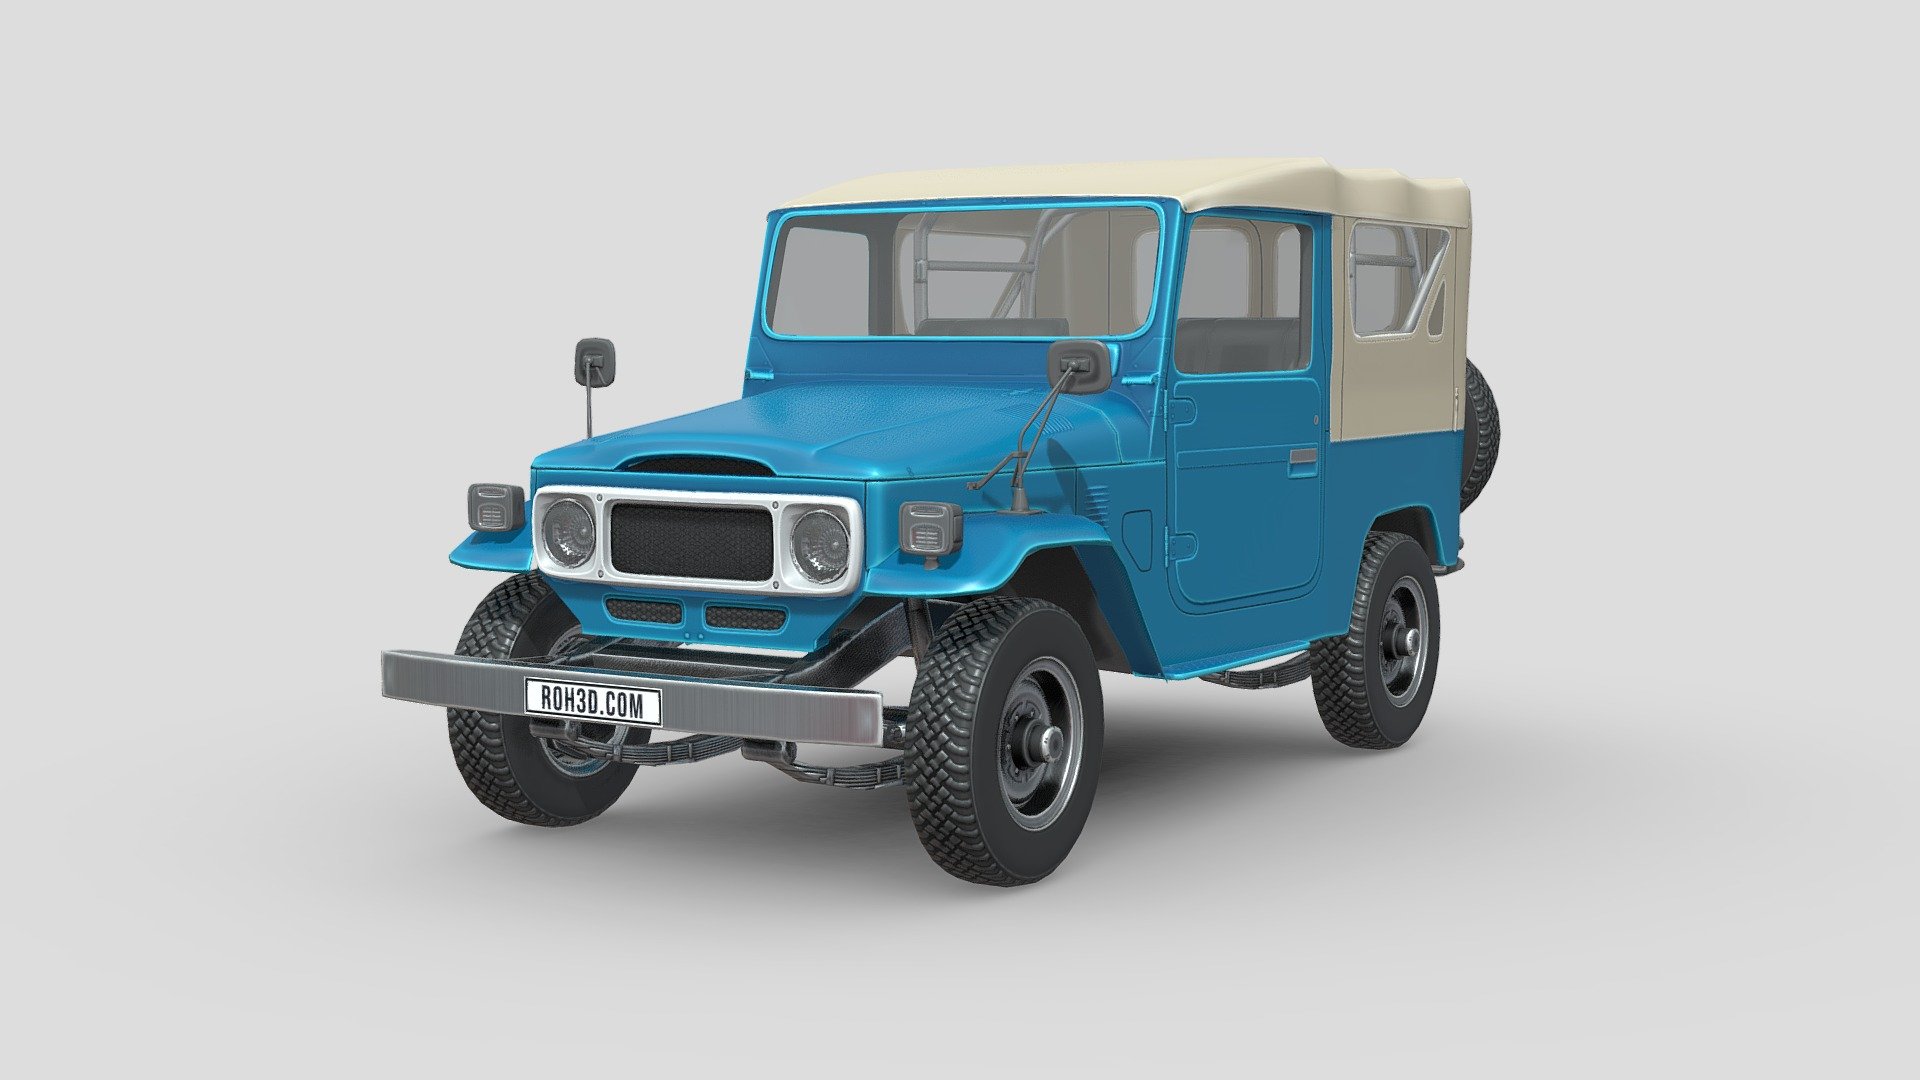 The Toyota Land Cruiser (J40), is a series of Land Cruisers made by Toyota from 1960 until 2001. Traditional body on frame, most 40 series Land Cruisers were built as 2-door models with slightly larger dimensions than the similar Jeep CJ.

The model was available in short (J40/41/42), medium (J43/44/46) and long (J45/47) wheelbase versions, with petrol and diesel engines 3d model